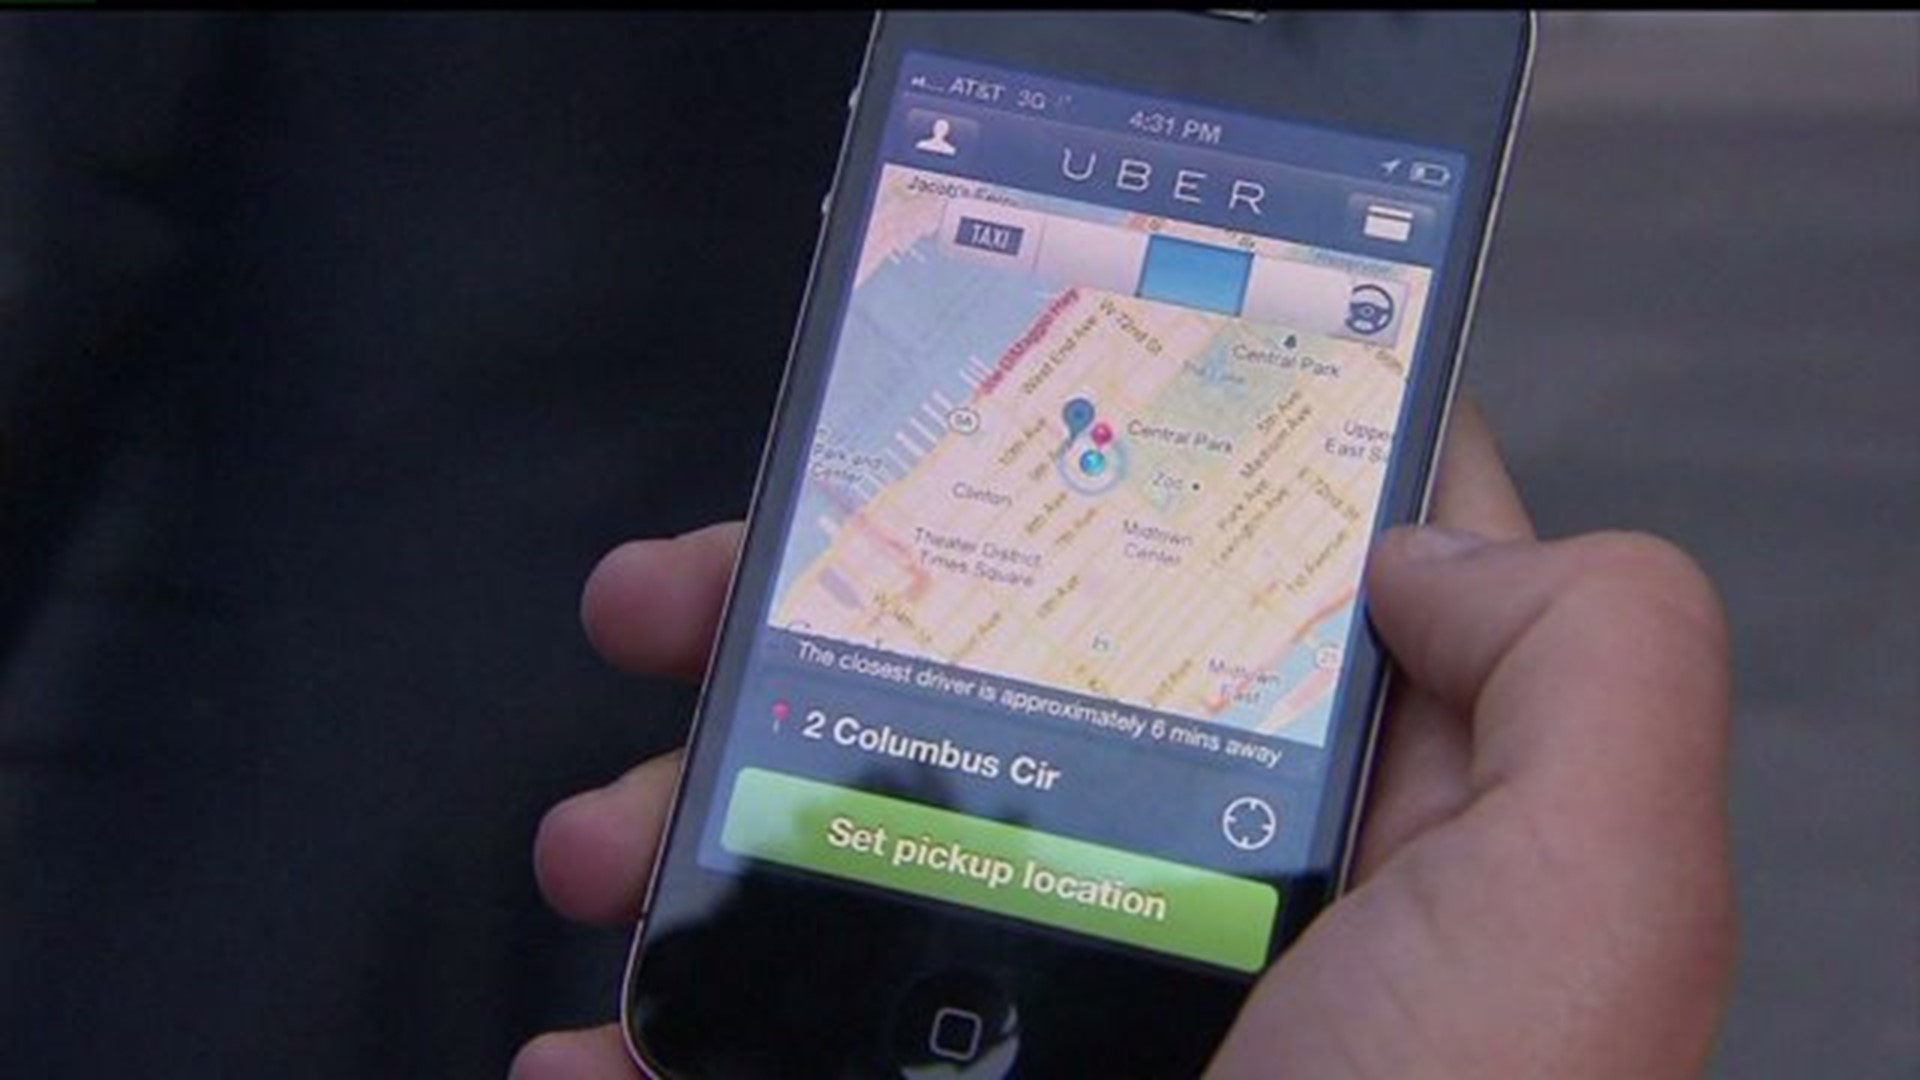 Ride-Share Service "Uber" Approved for Pennsylvania